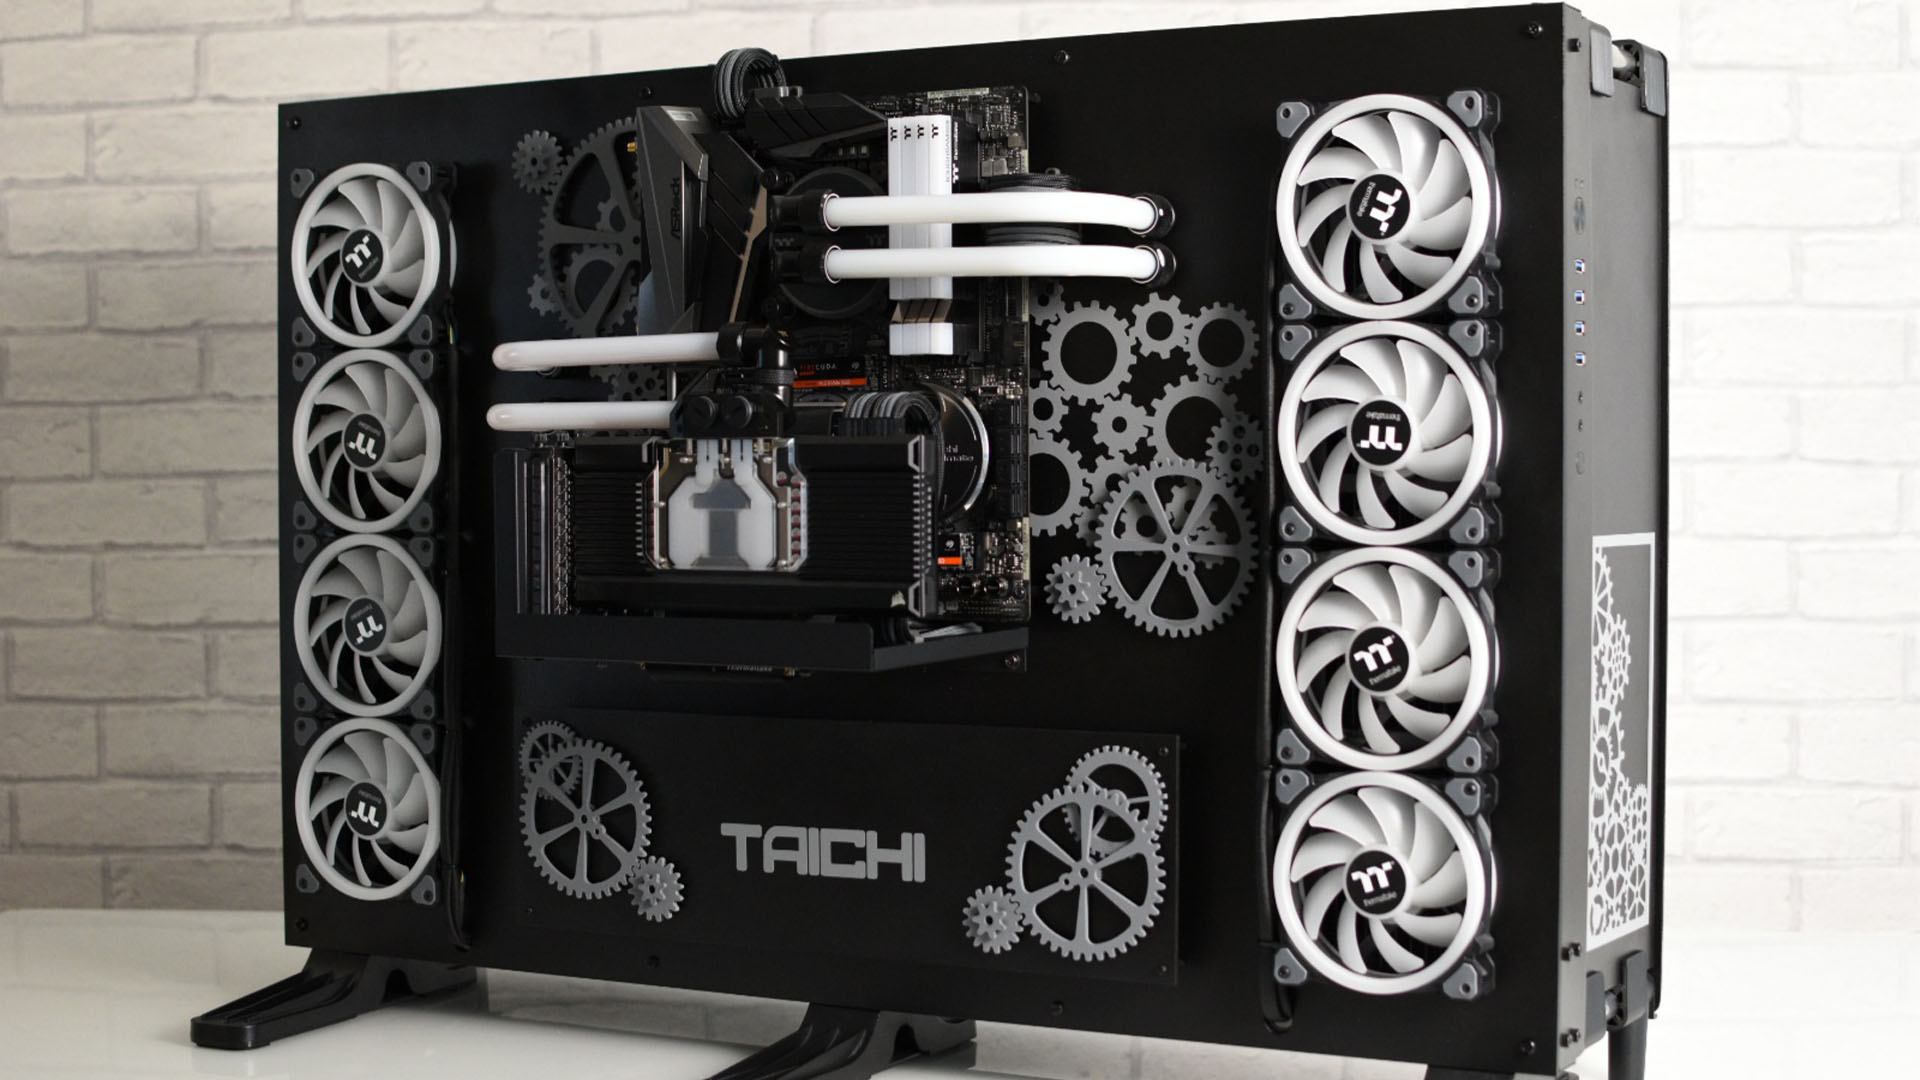 A black and white open air gaming PC build with cogs